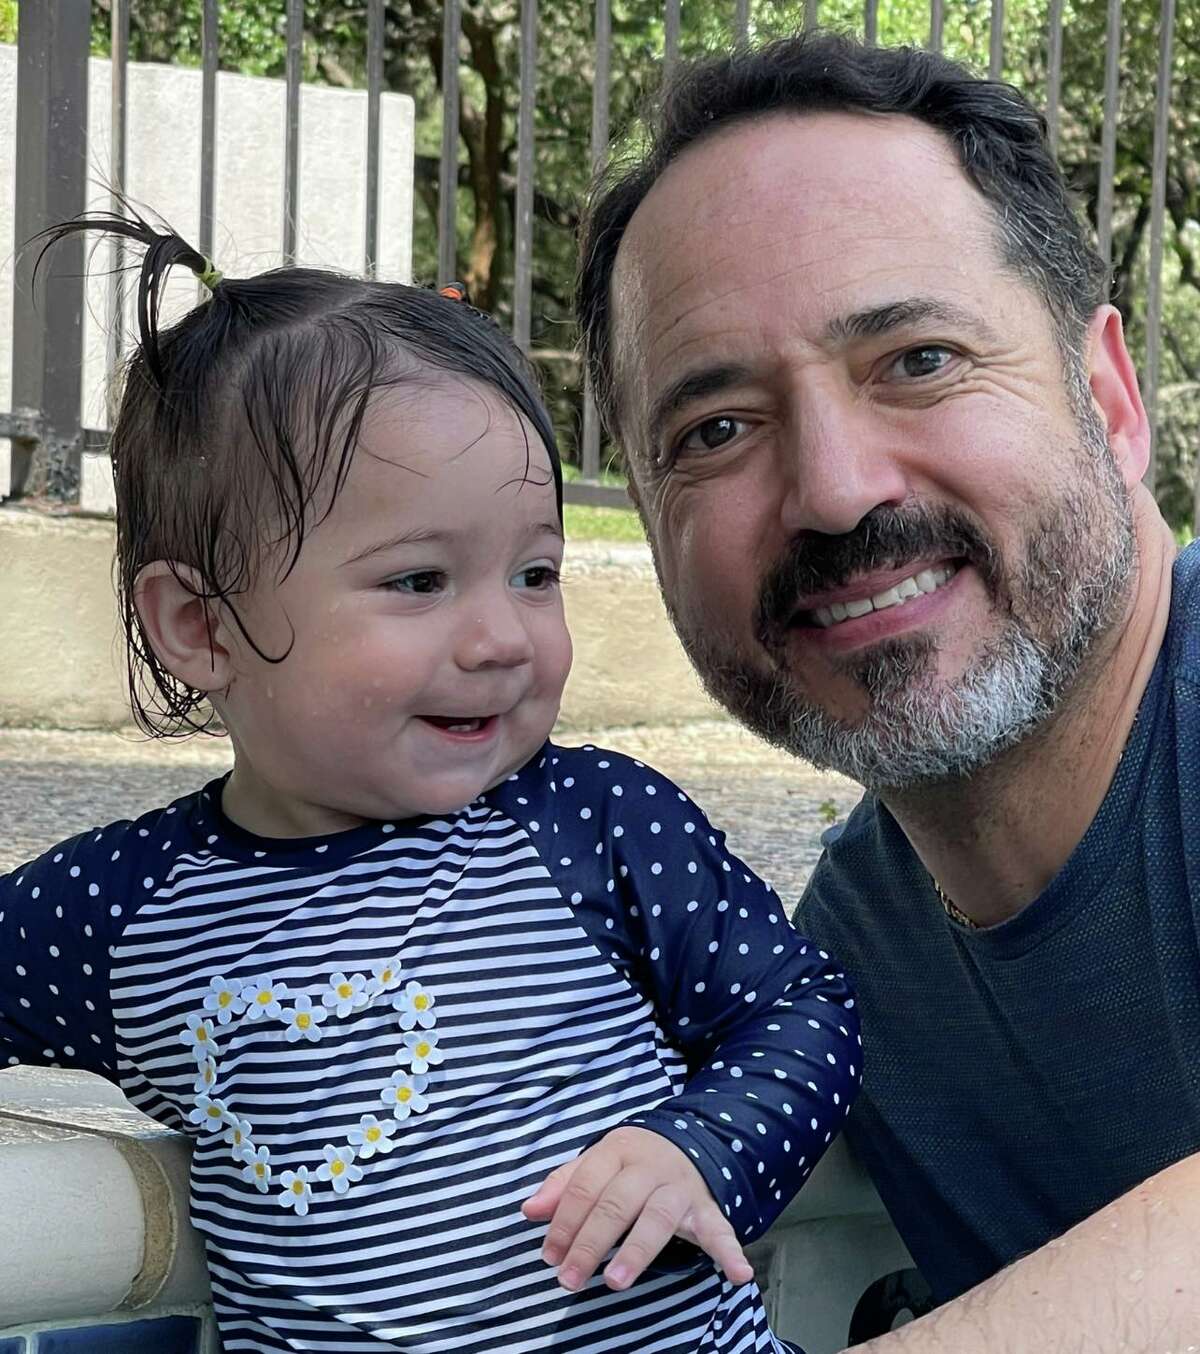 In social media posts last weekend, State Sen. José Menéndez shared that his granddaughter, Adalisa, tested positive for COVID-19 despite his entire family being vaccinated. Yesterday he announced he and two other family members have tested positive.